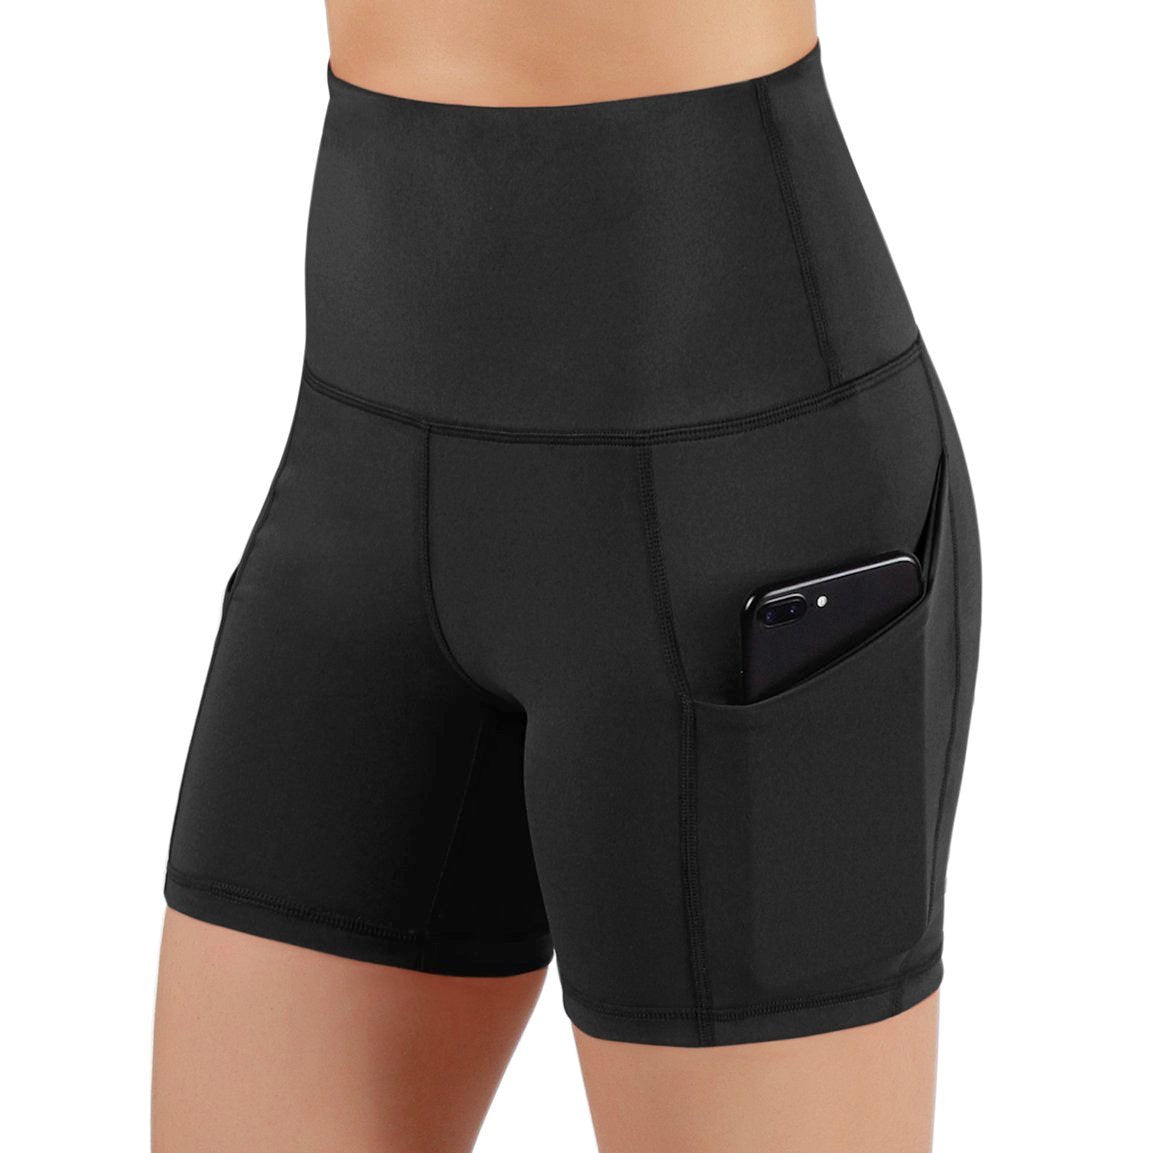 Jolie High-Waisted Athletic Shorts with Hip Pockets Angelwarriorfitness.com